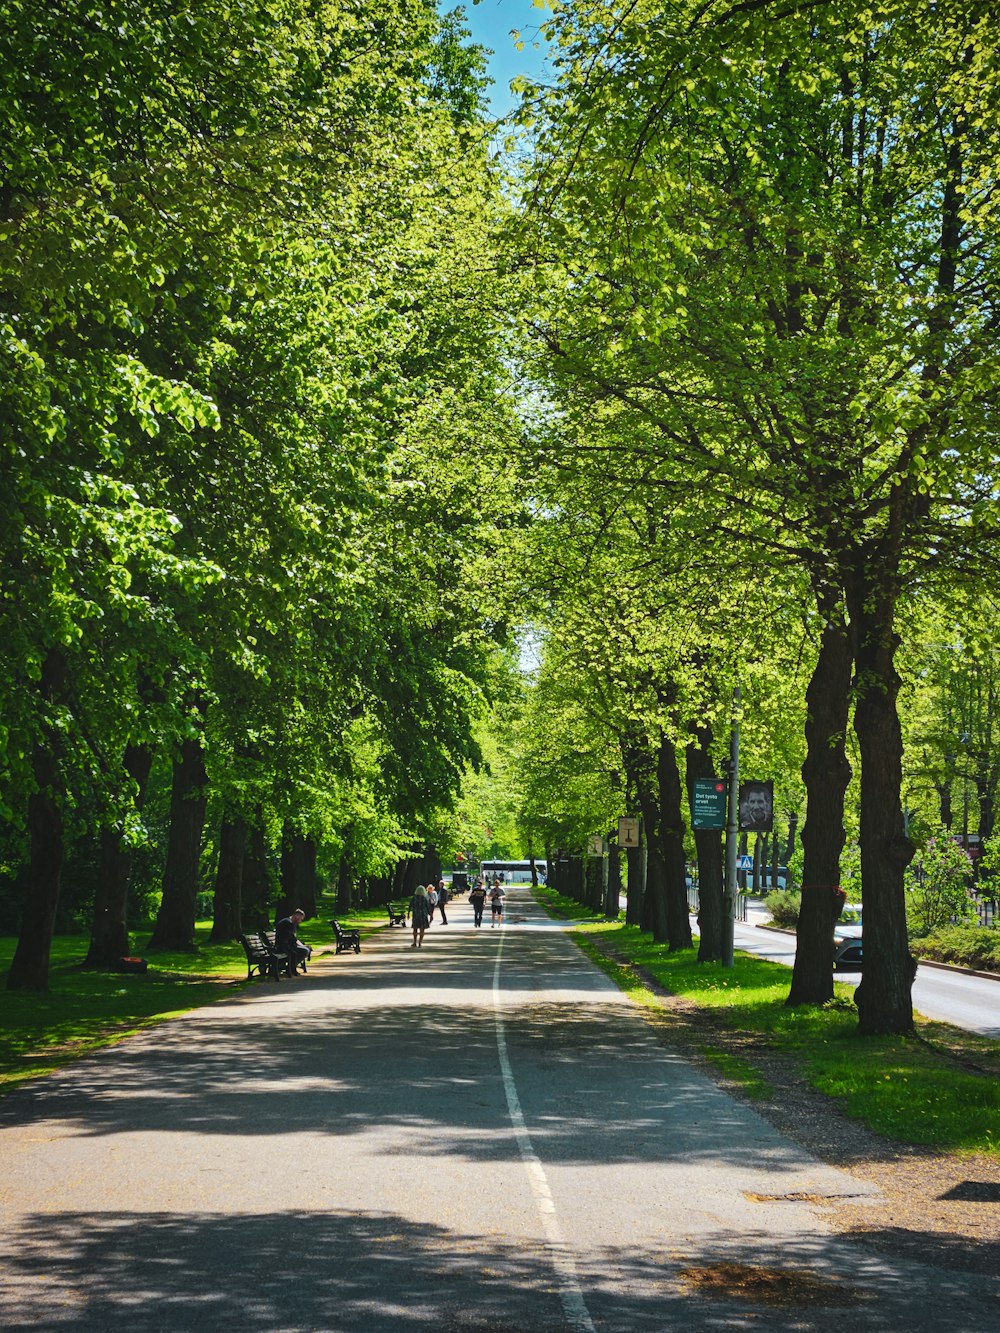 a street lined with trees and people walking down it